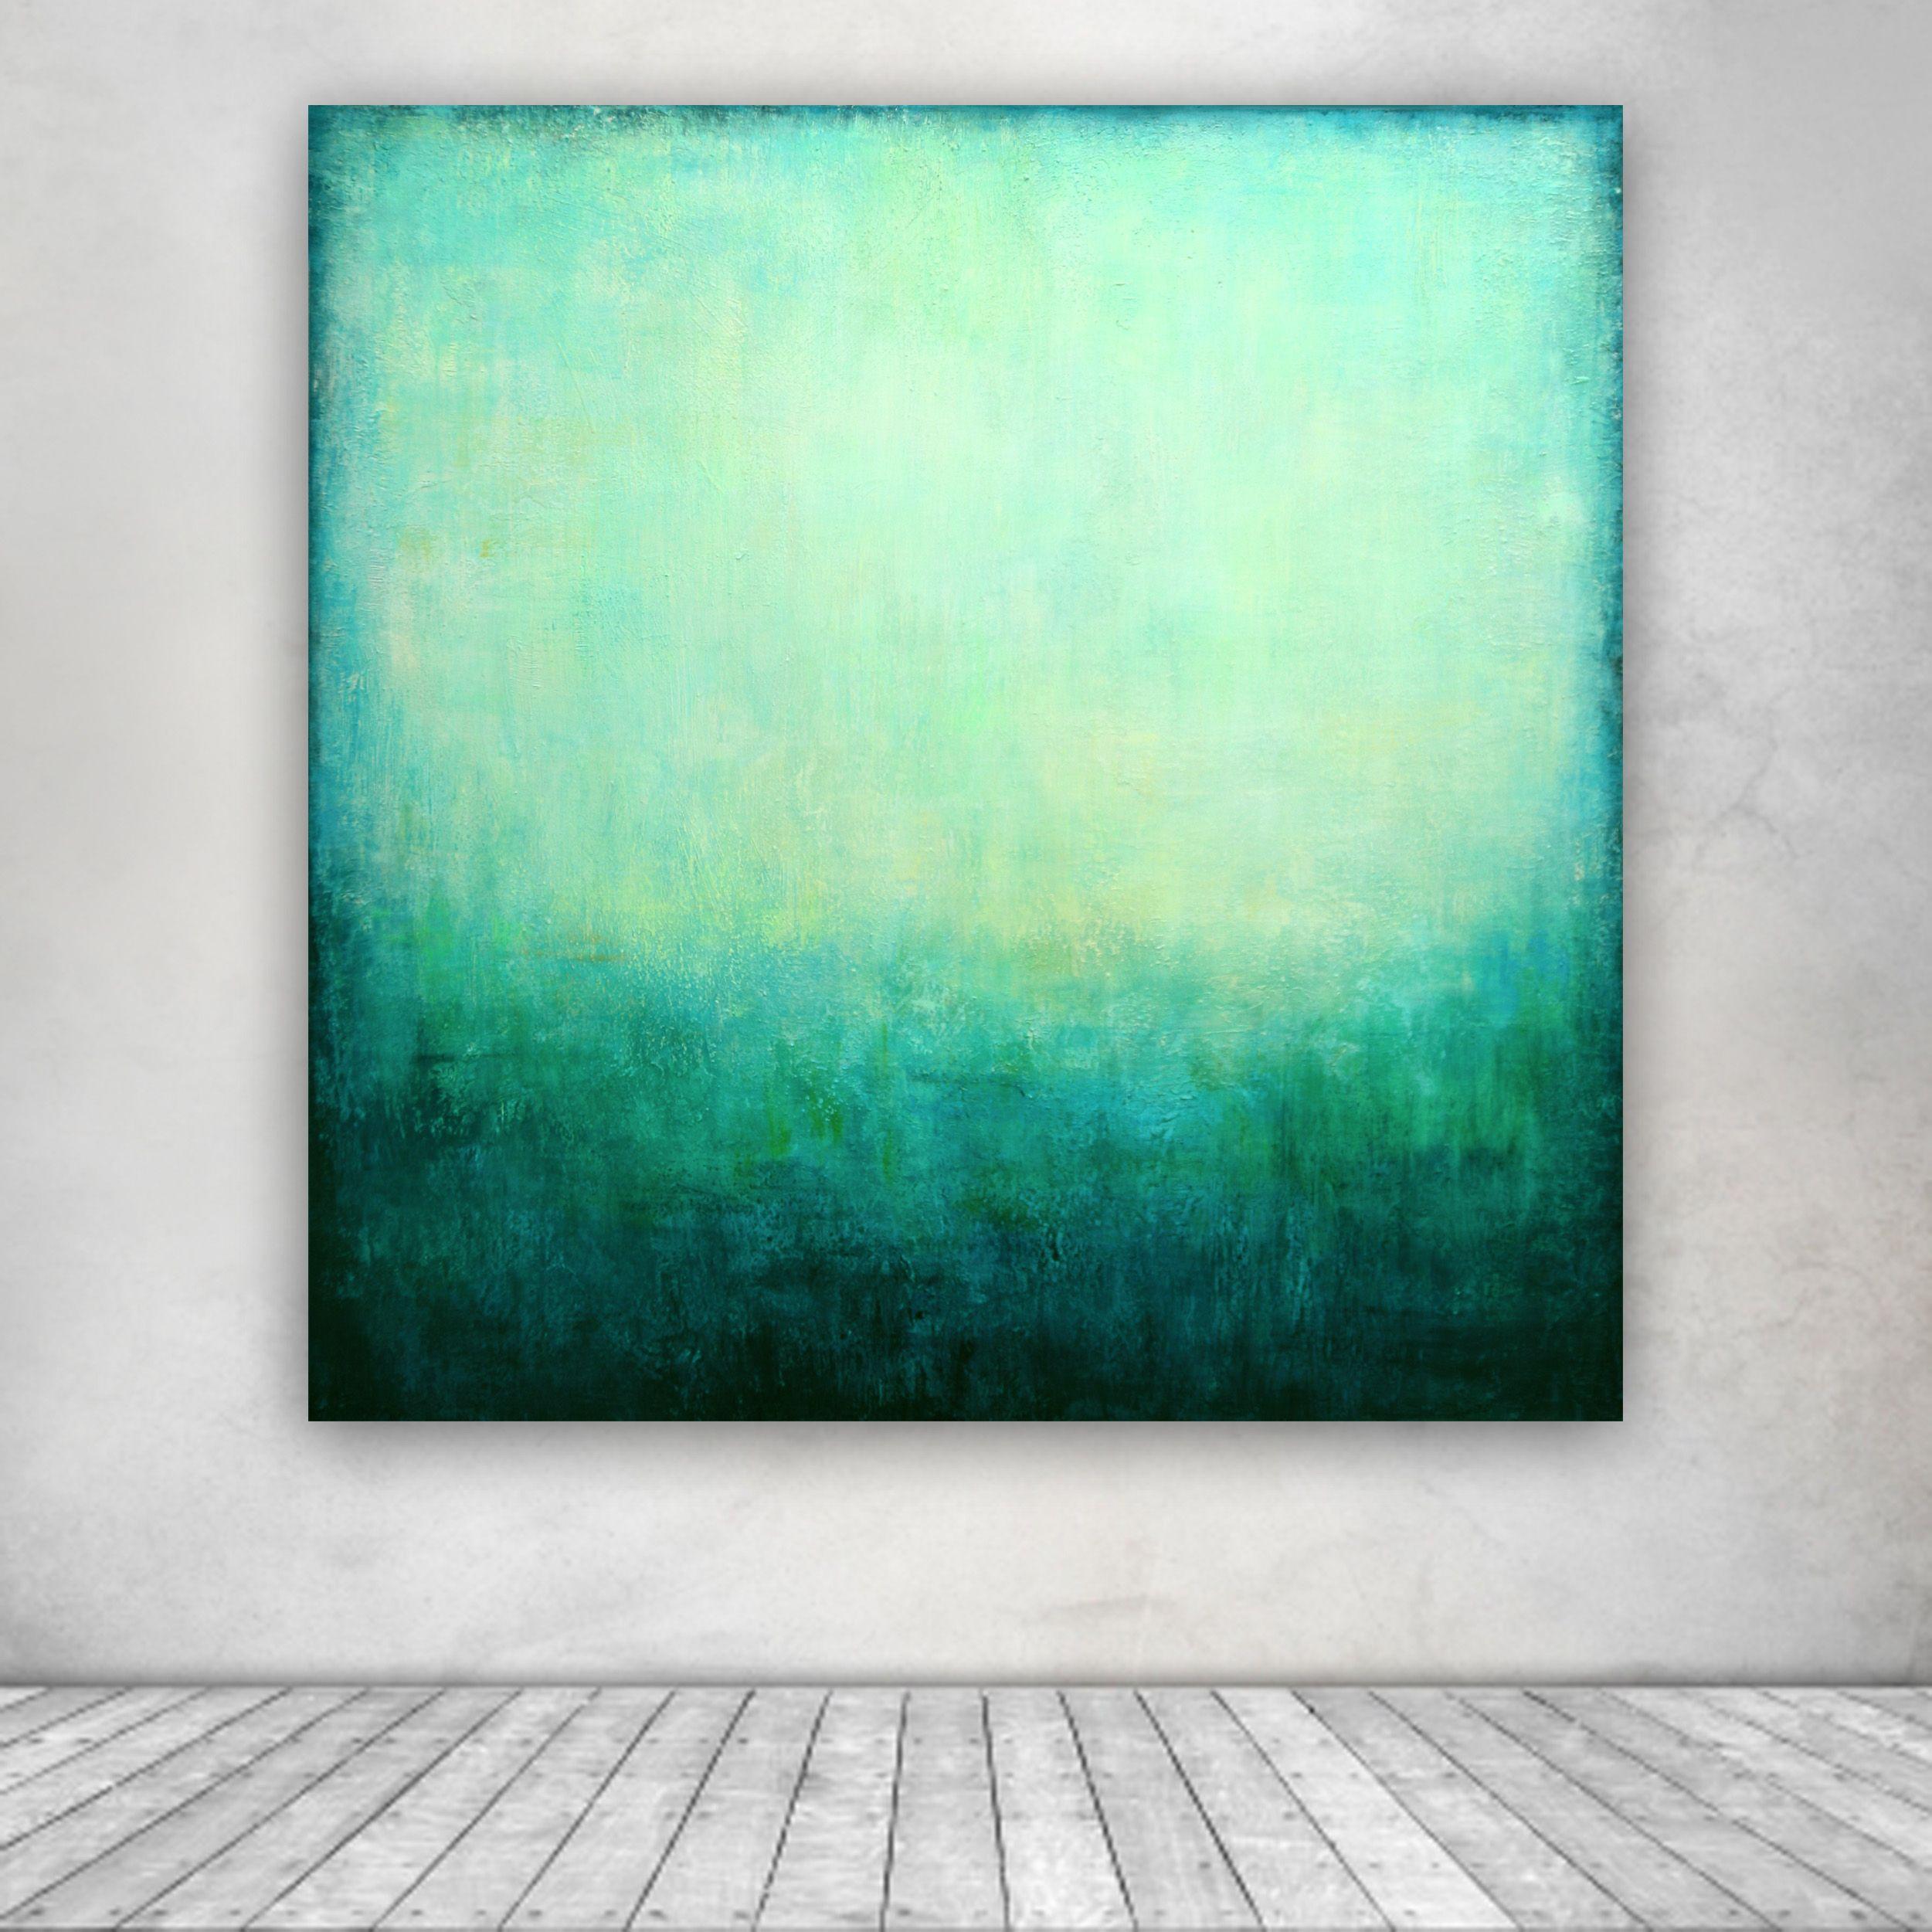 Turquoise Green Dreaming, Painting, Acrylic on Canvas 2